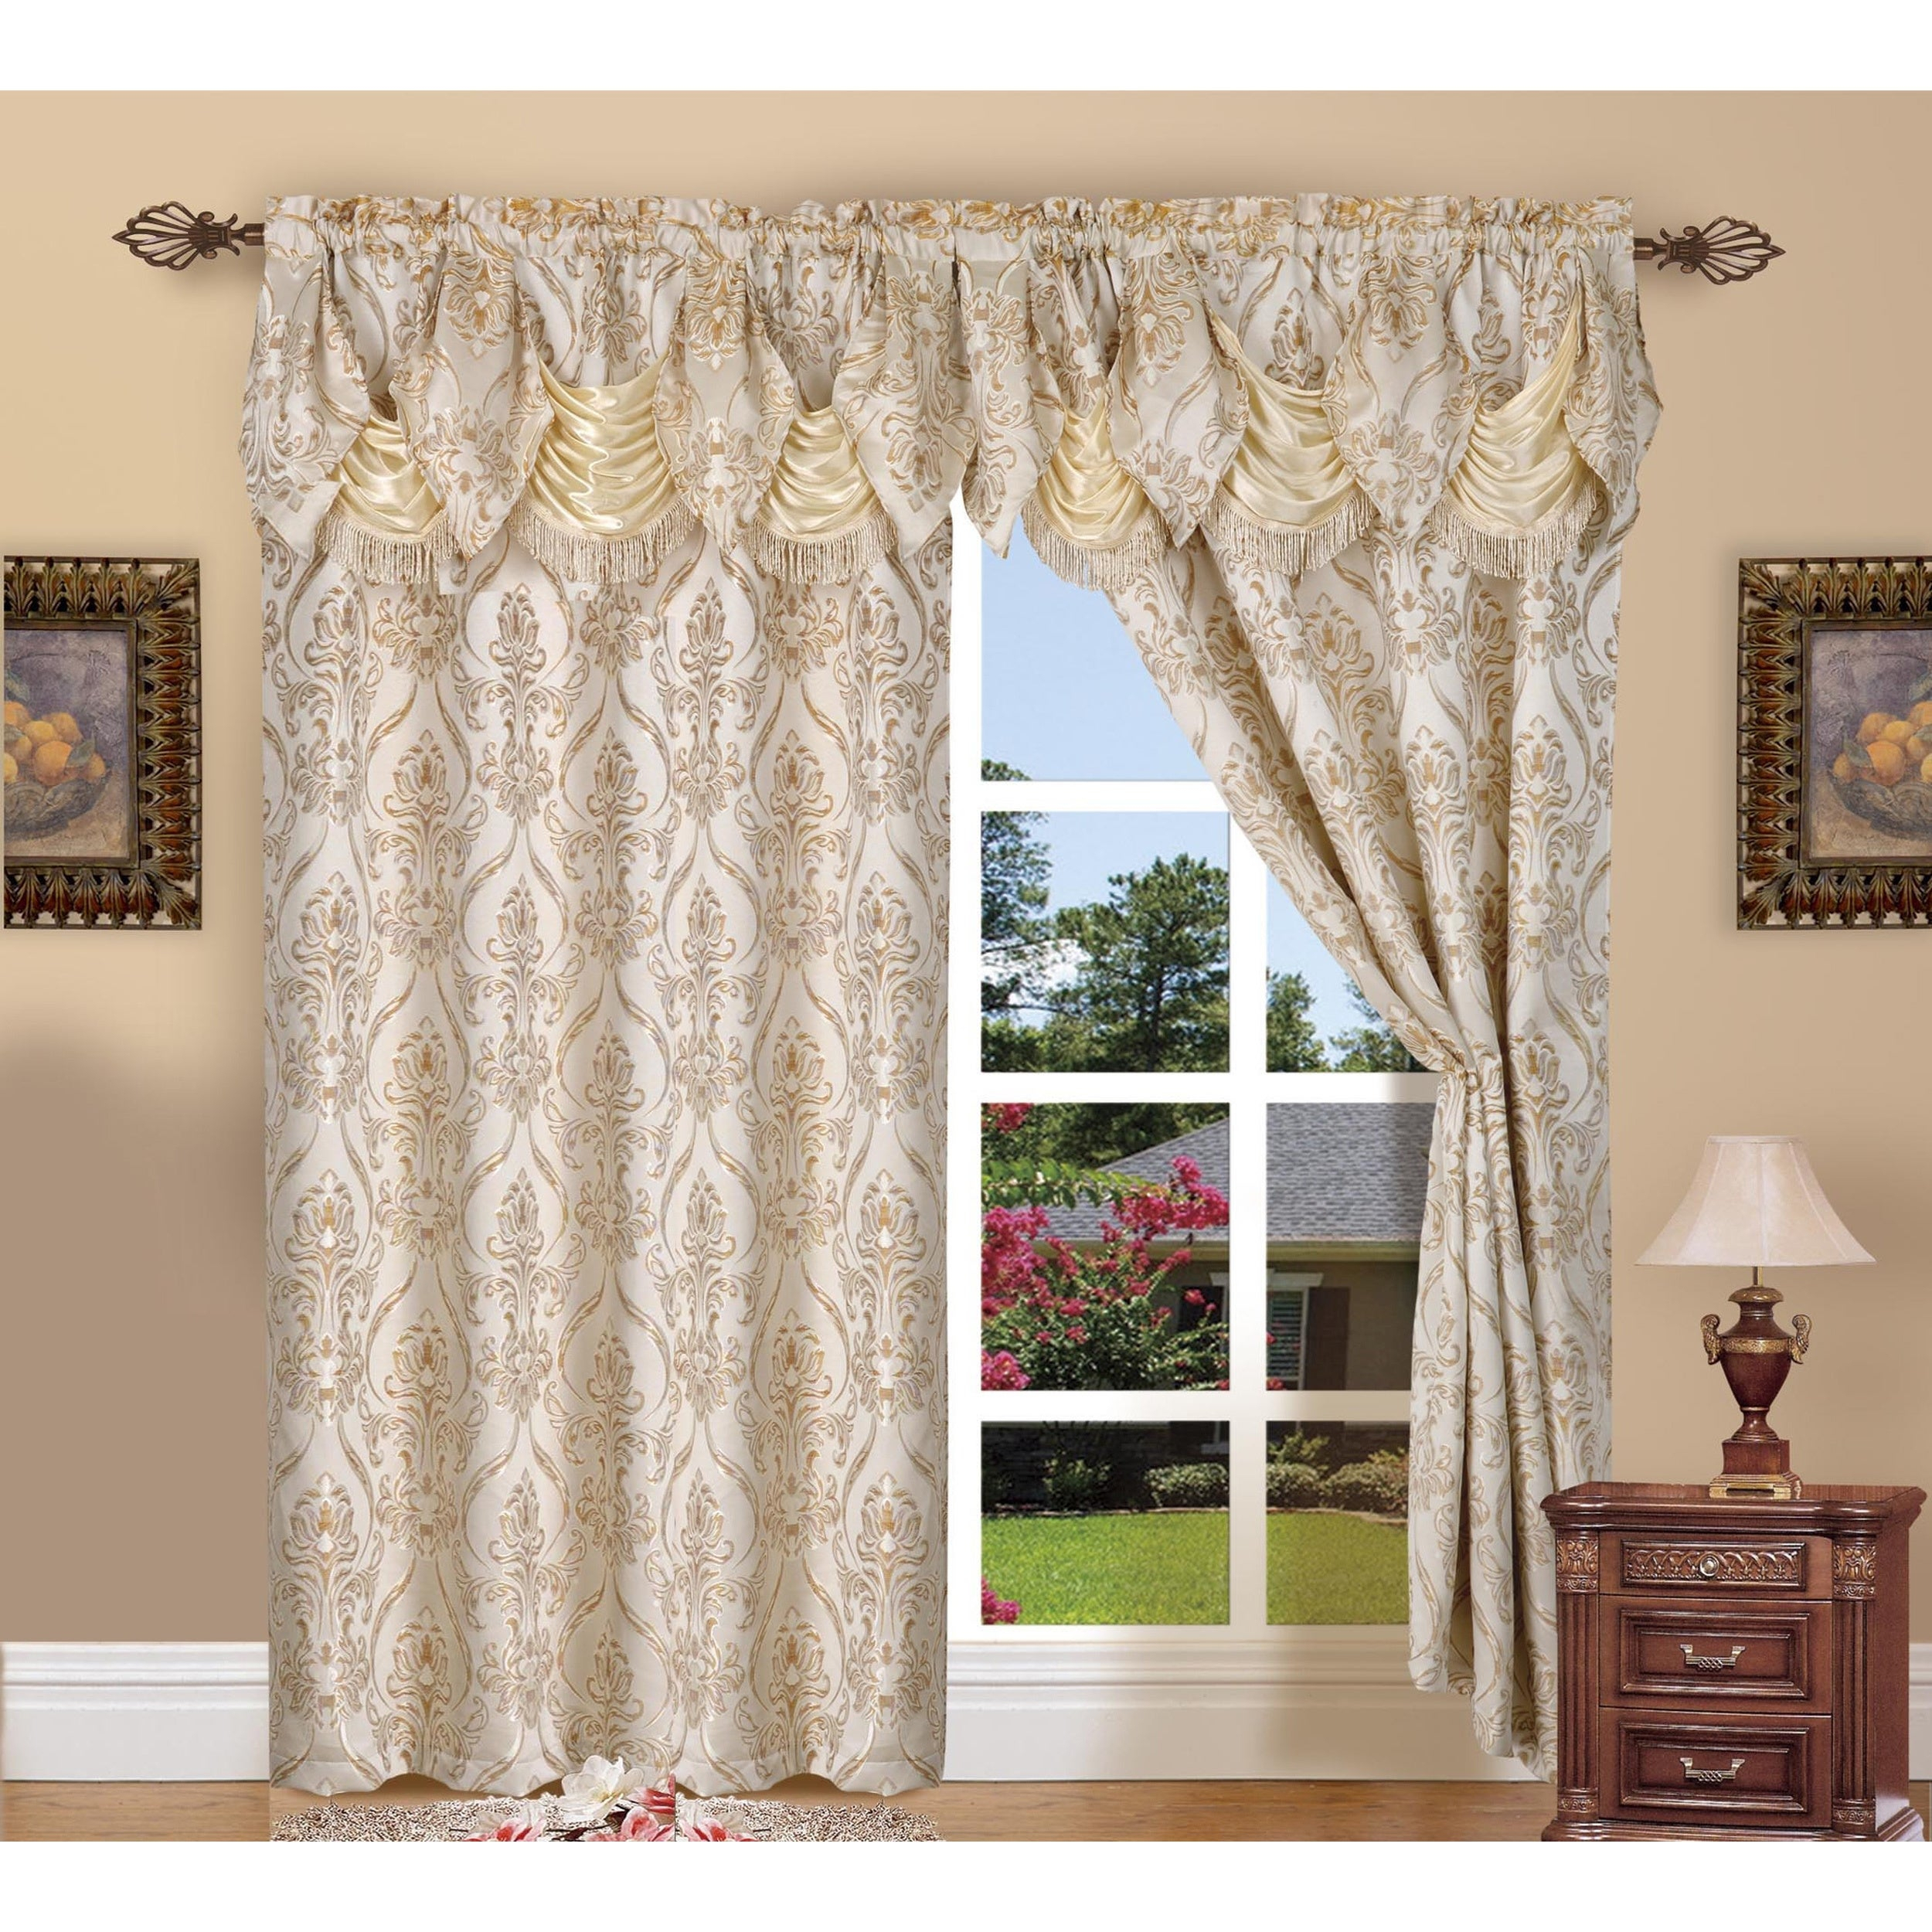 Curtains with valances attached 7